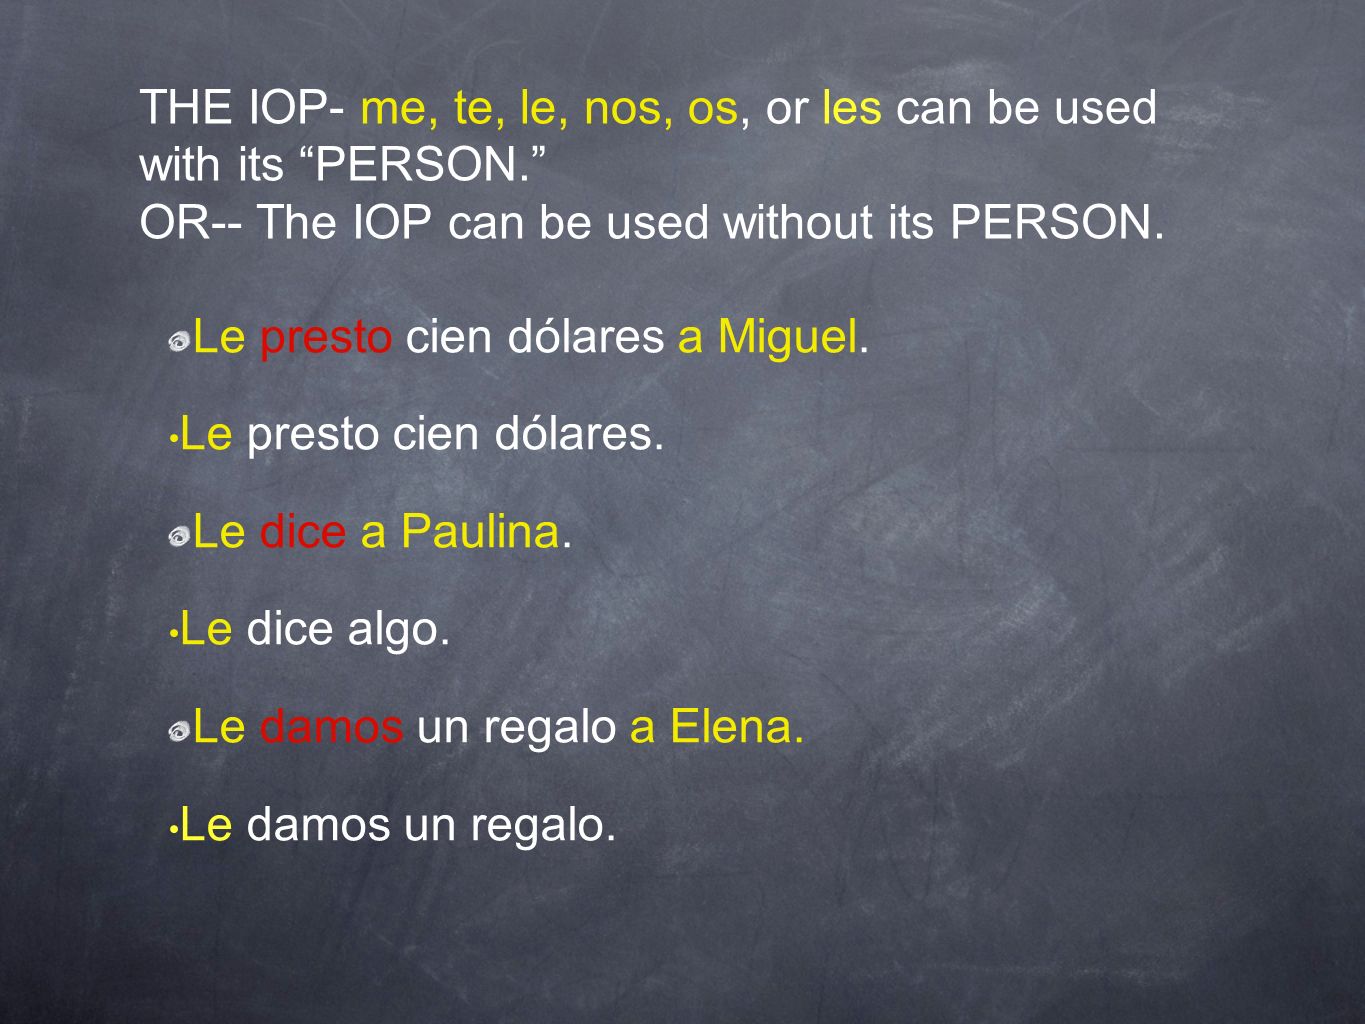 THE IOP- me, te, le, nos, os, or les can be used with its PERSON